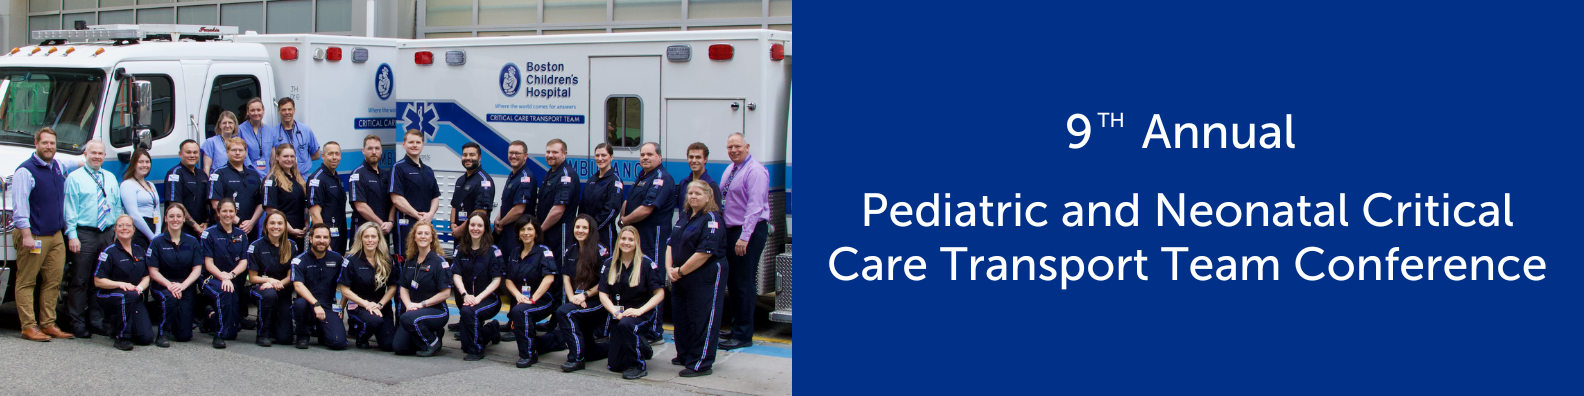 9th Annual Pediatric and Neonatal Critical Care Transport Team Conference Banner